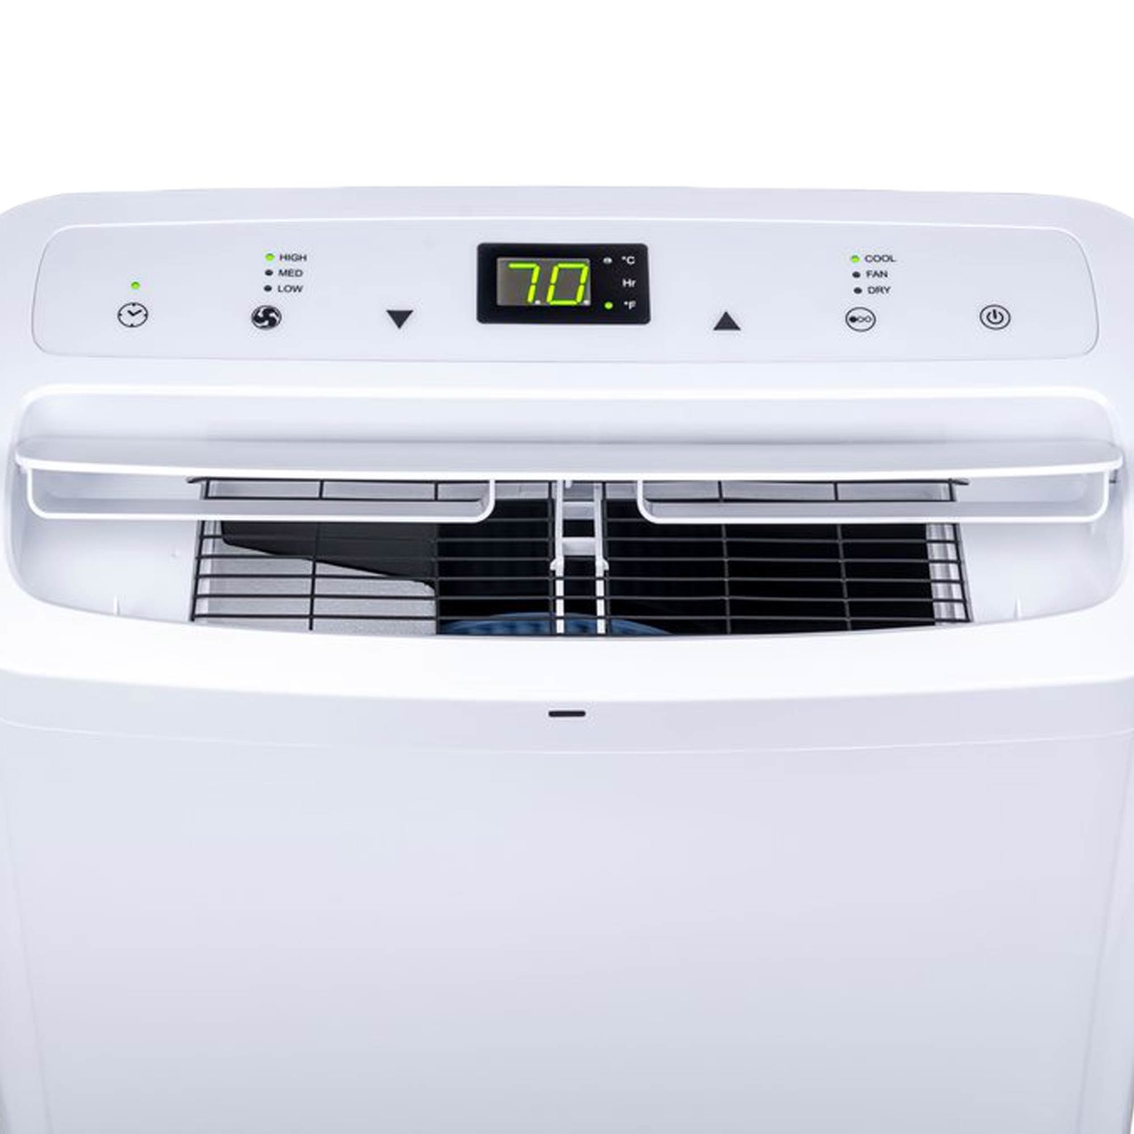 NewAir Compact 14,000 BTU Portable Air Conditioner - Image 5 of 10